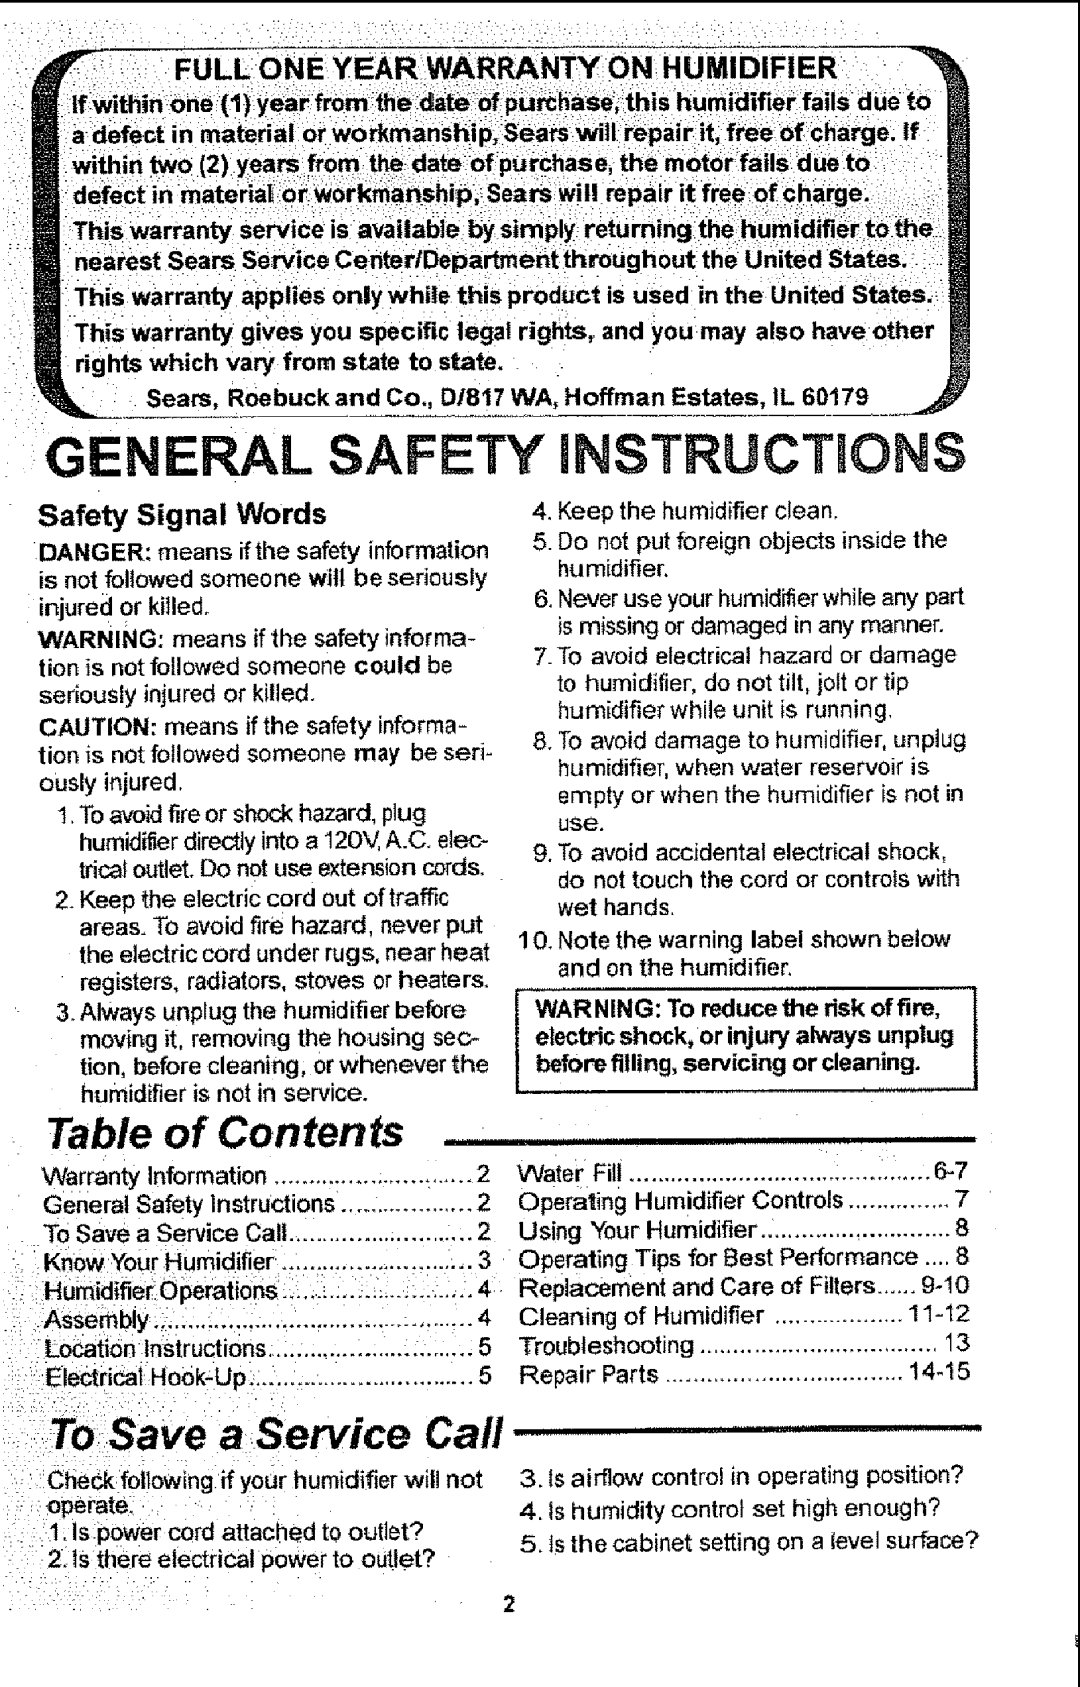 Sears 758.14451 Table of Contents, To Save a Service Call, GENERAL SAFETY iNSTRUCTiONS, WARNING To reduce the risk of fire 